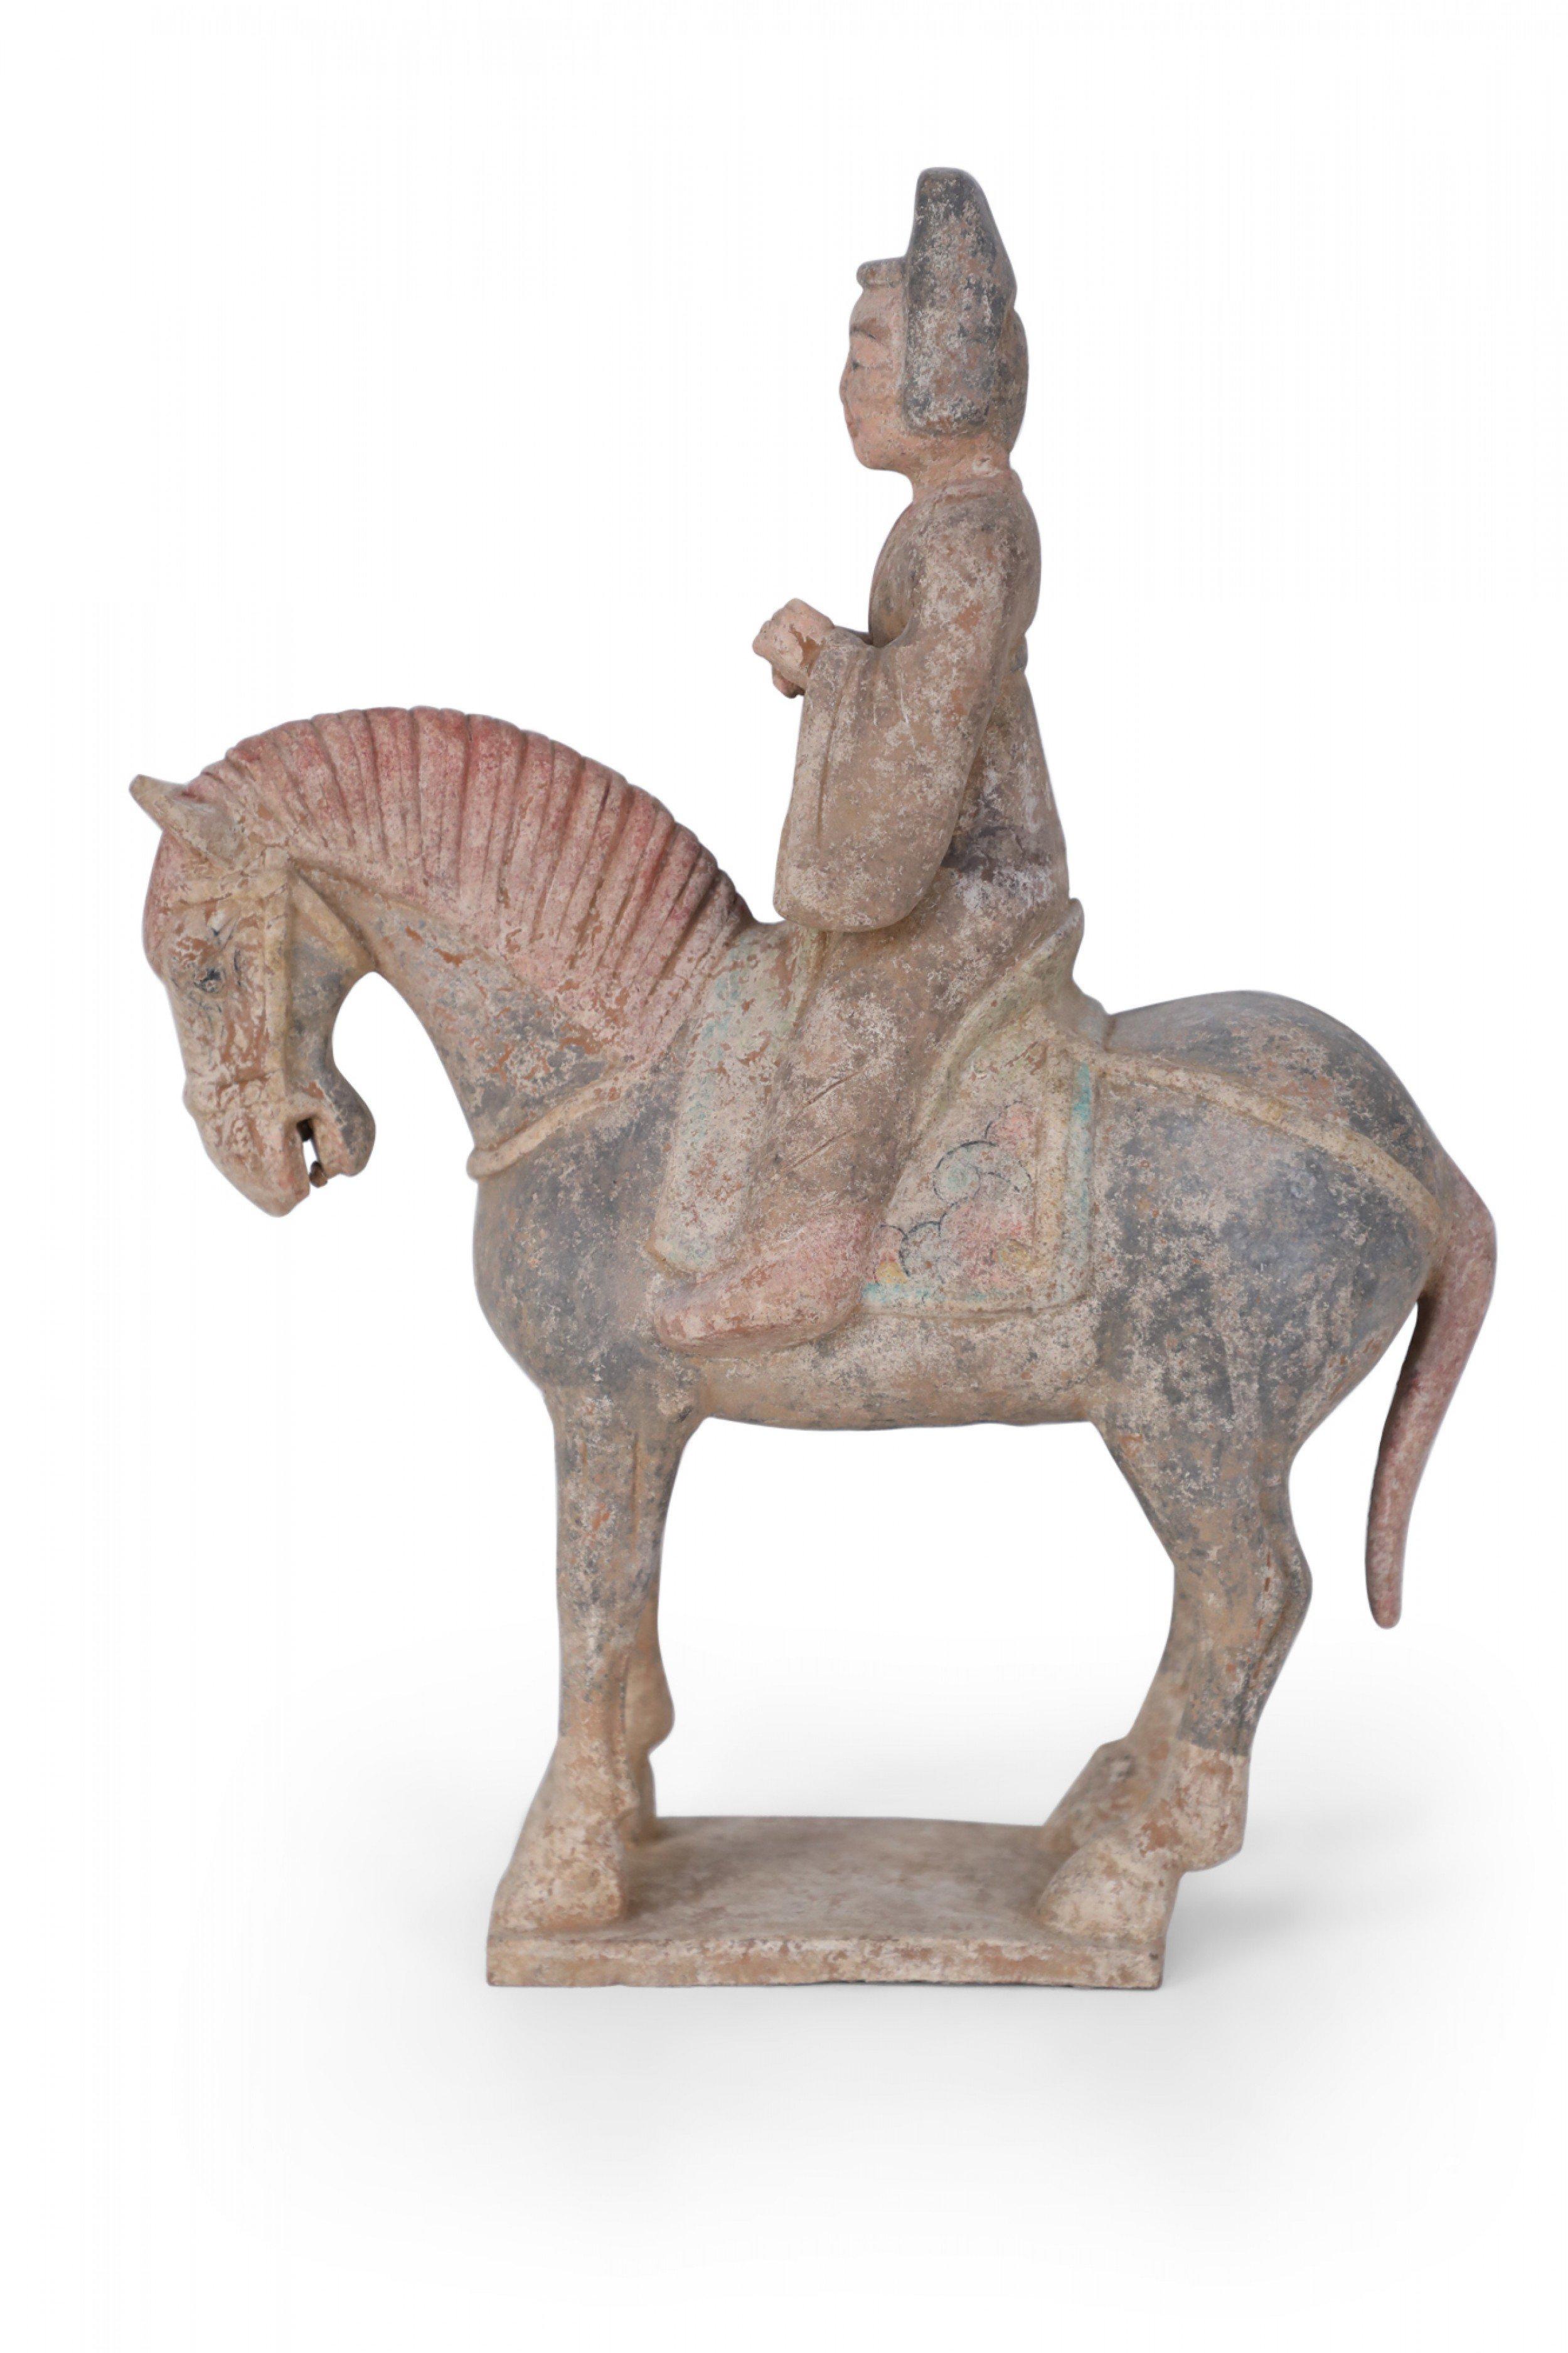 Antique Chinese Tang Dynasty-style terracotta tomb figure of a rider wearing robes sitting on a horse with a bowed head, on a square base.
      